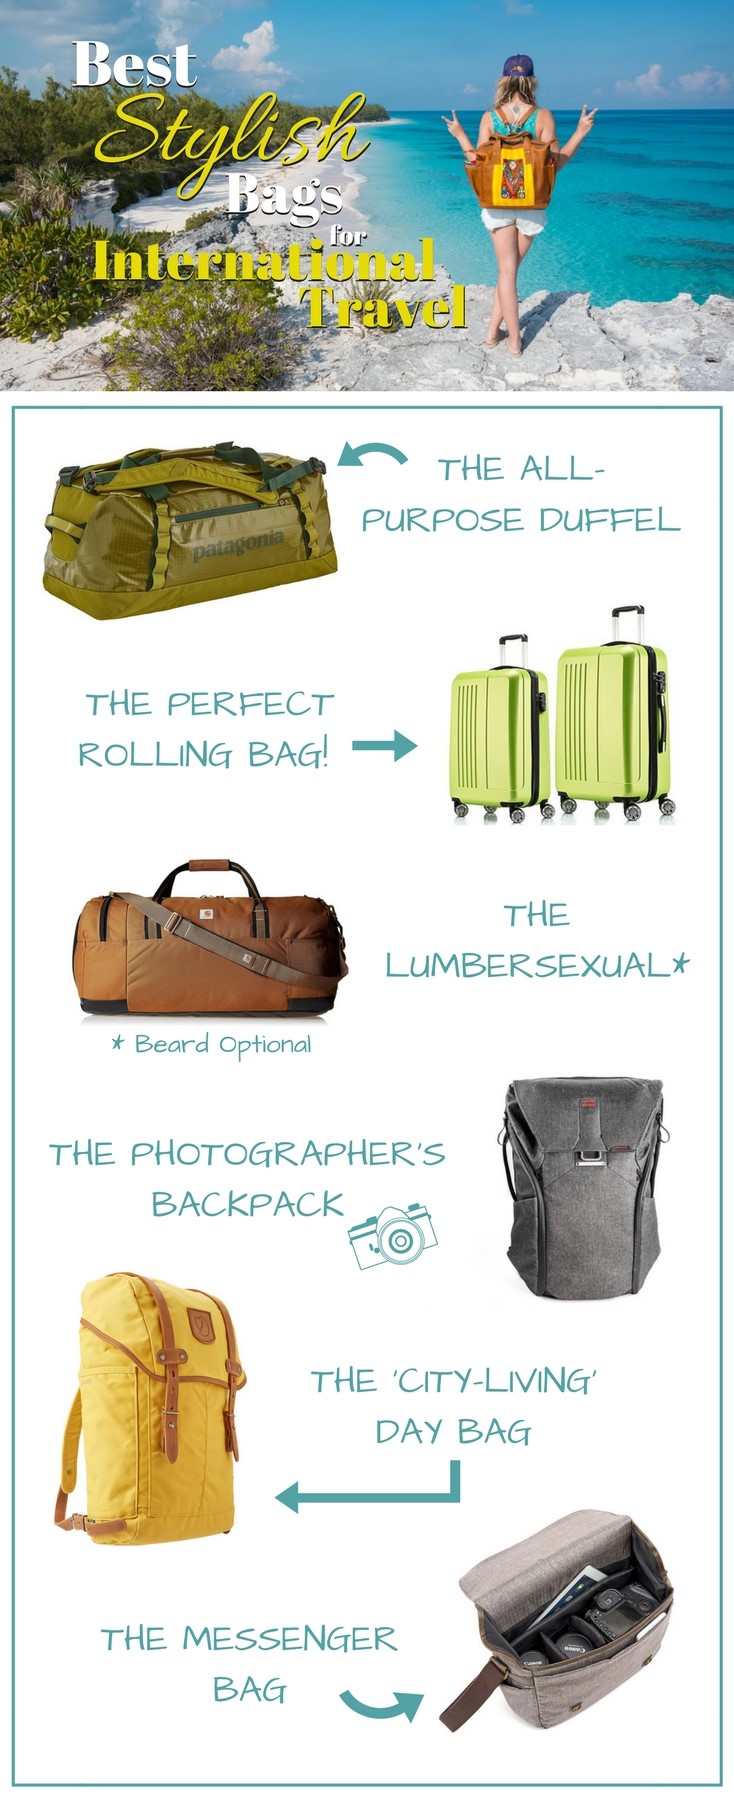 Best Stylish Bags for International Travel by Wandering Wheatleys